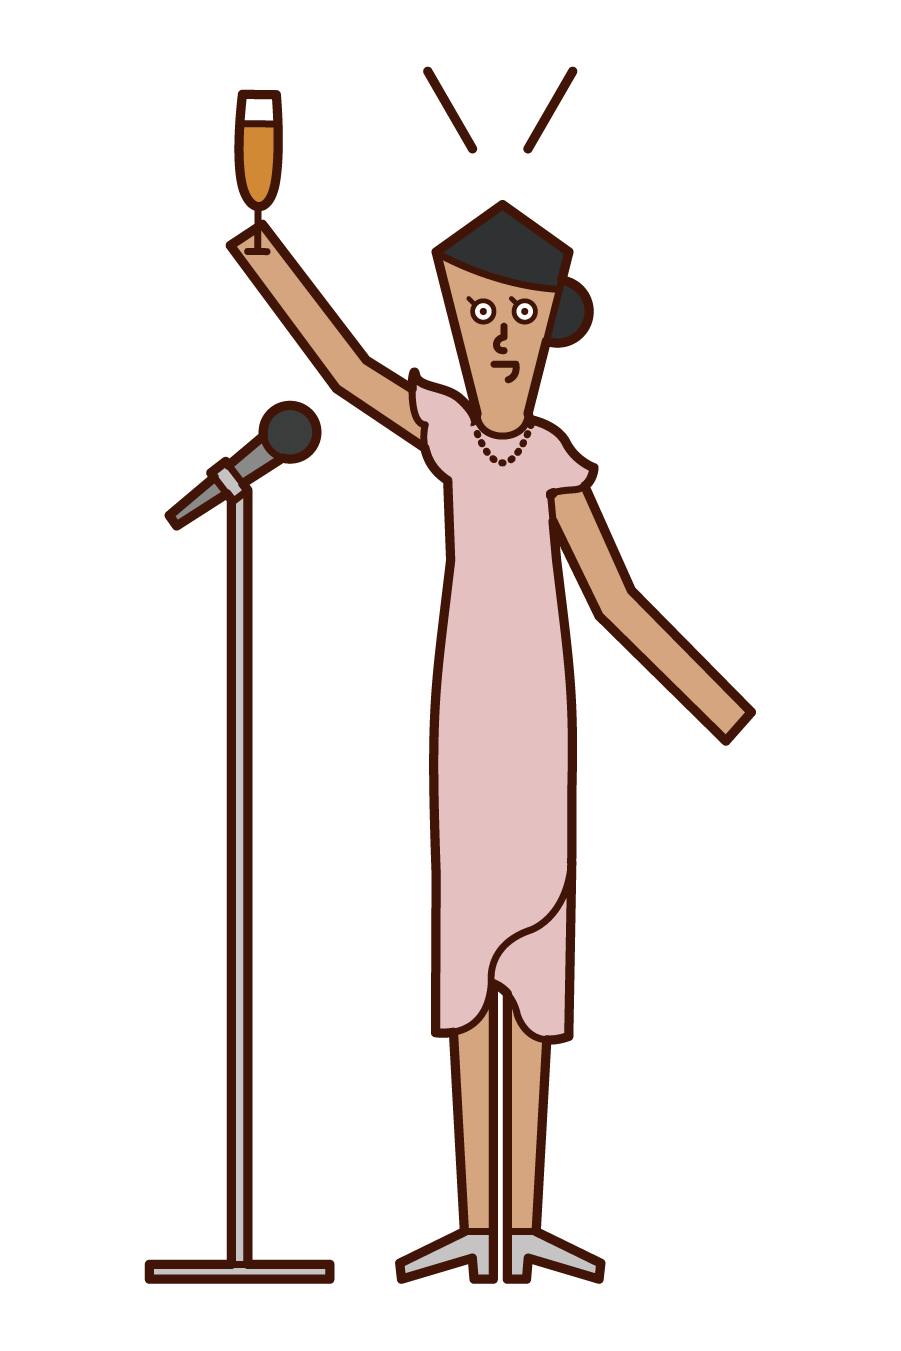 Illustration of a woman who takes the tone of a toast